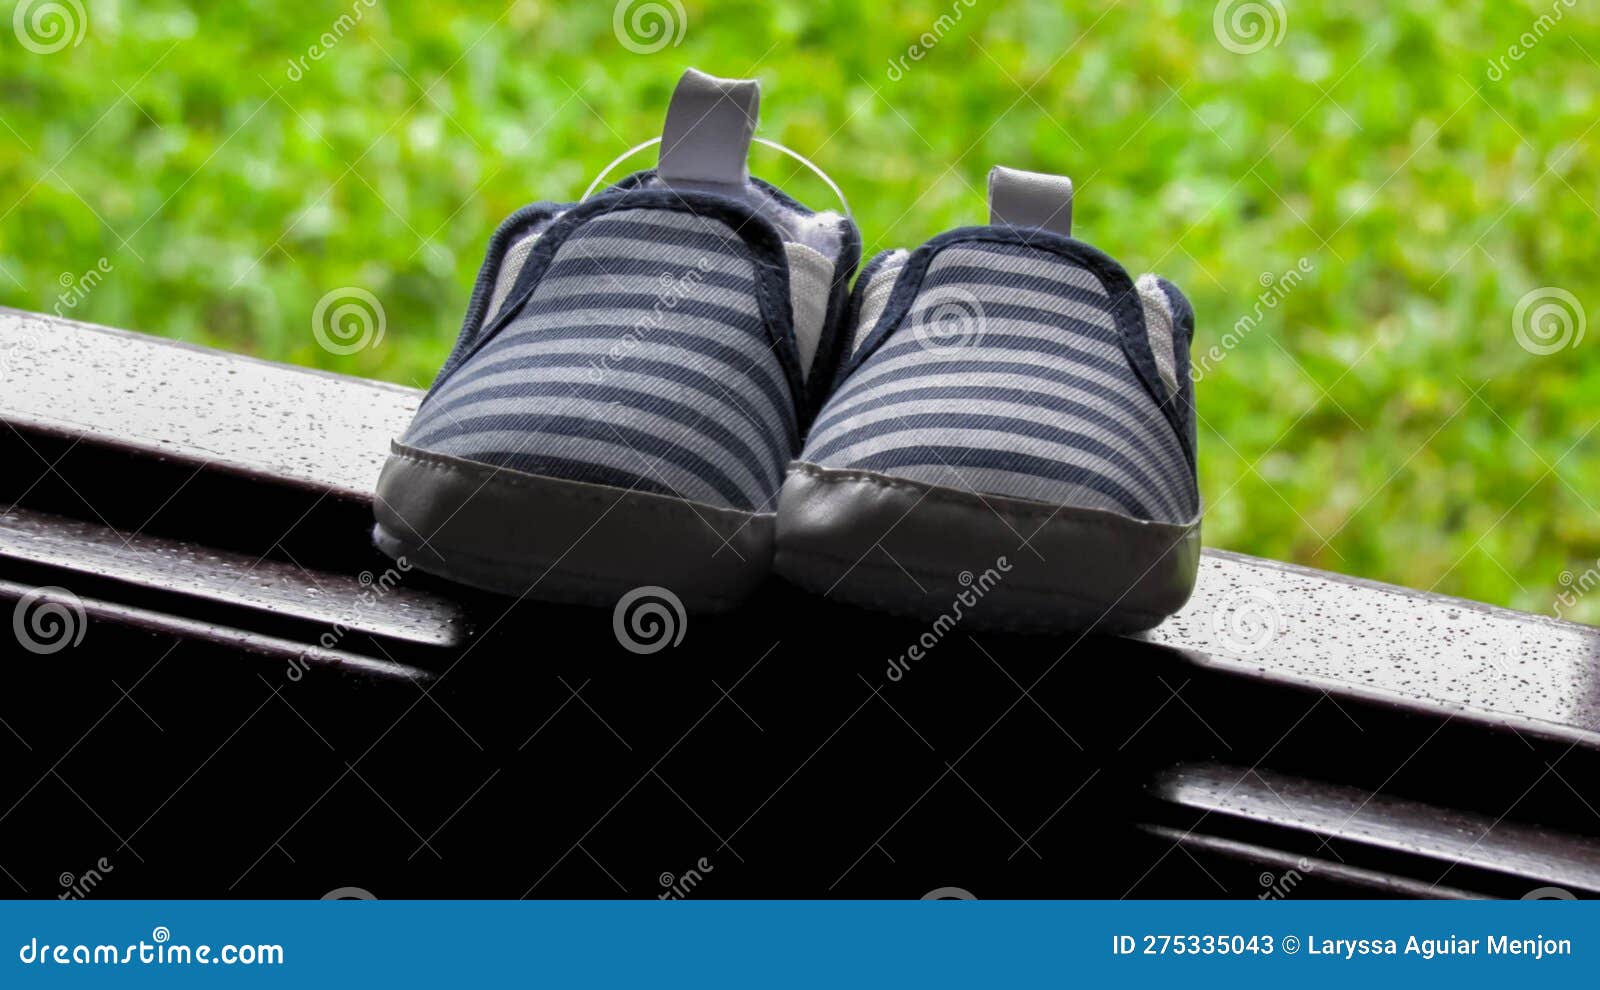 striped baby boy shoe with blue and white on window sill